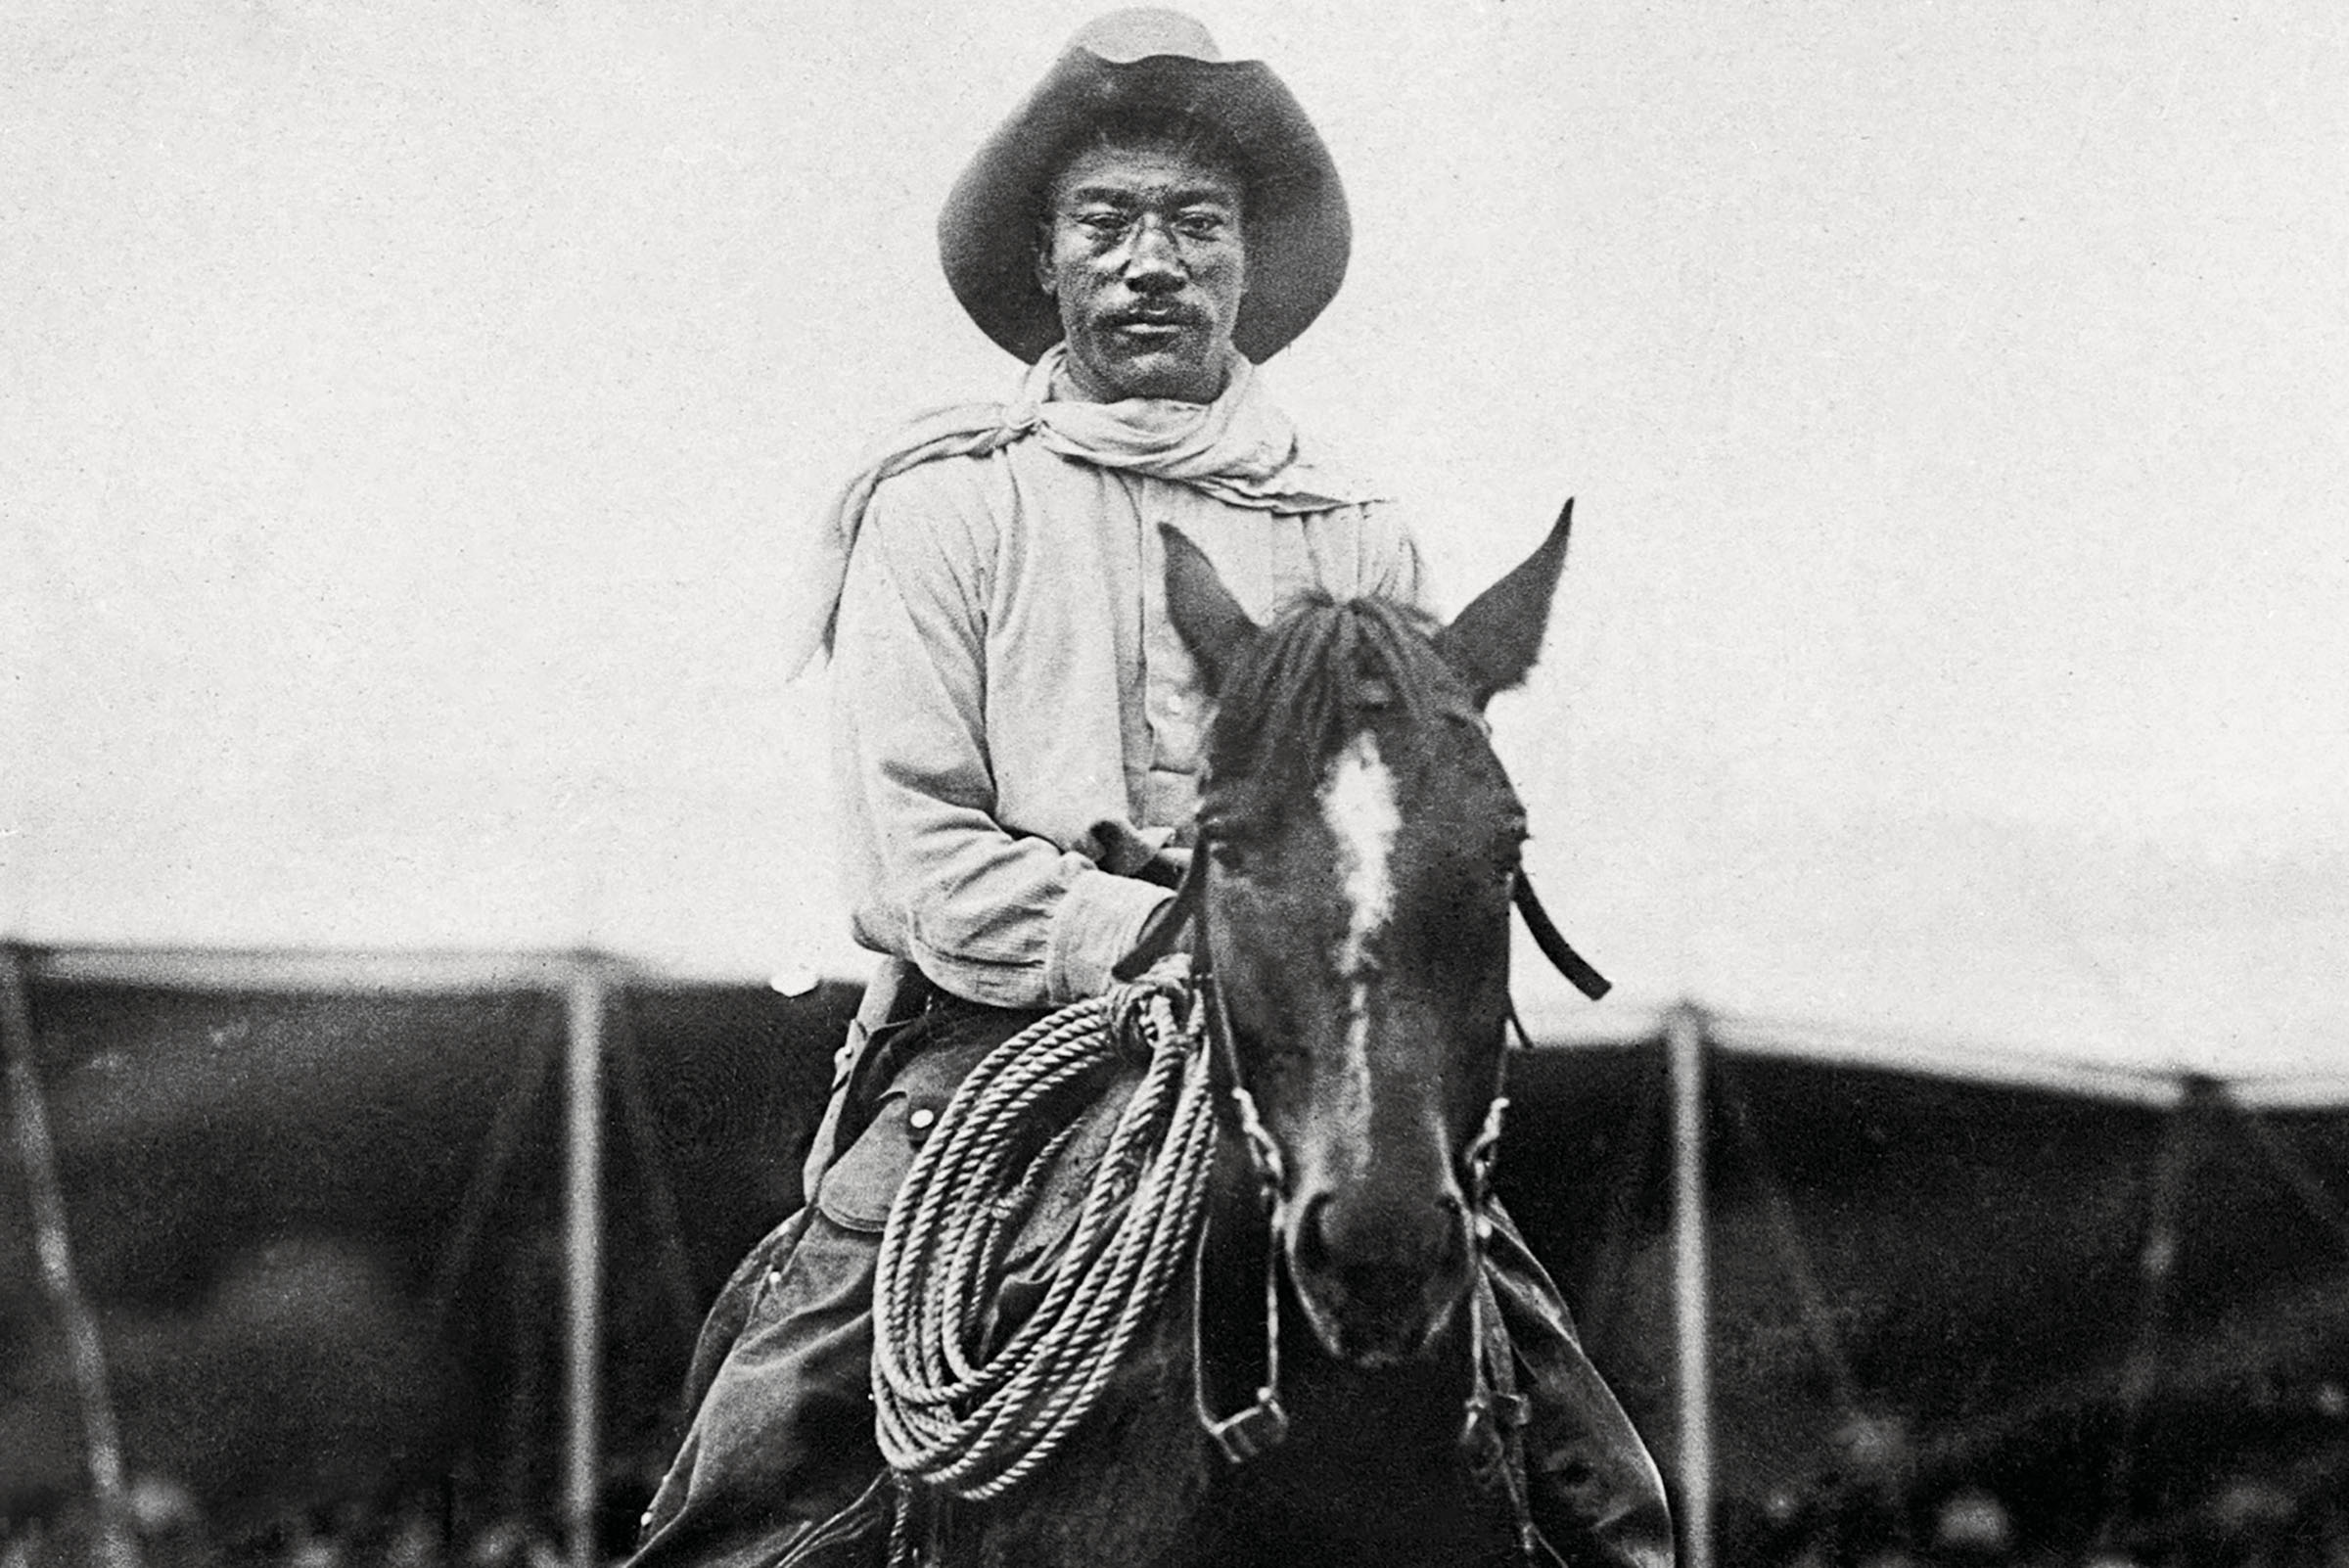 A man in a cowboy hat sits atop a horse in a black and white photo